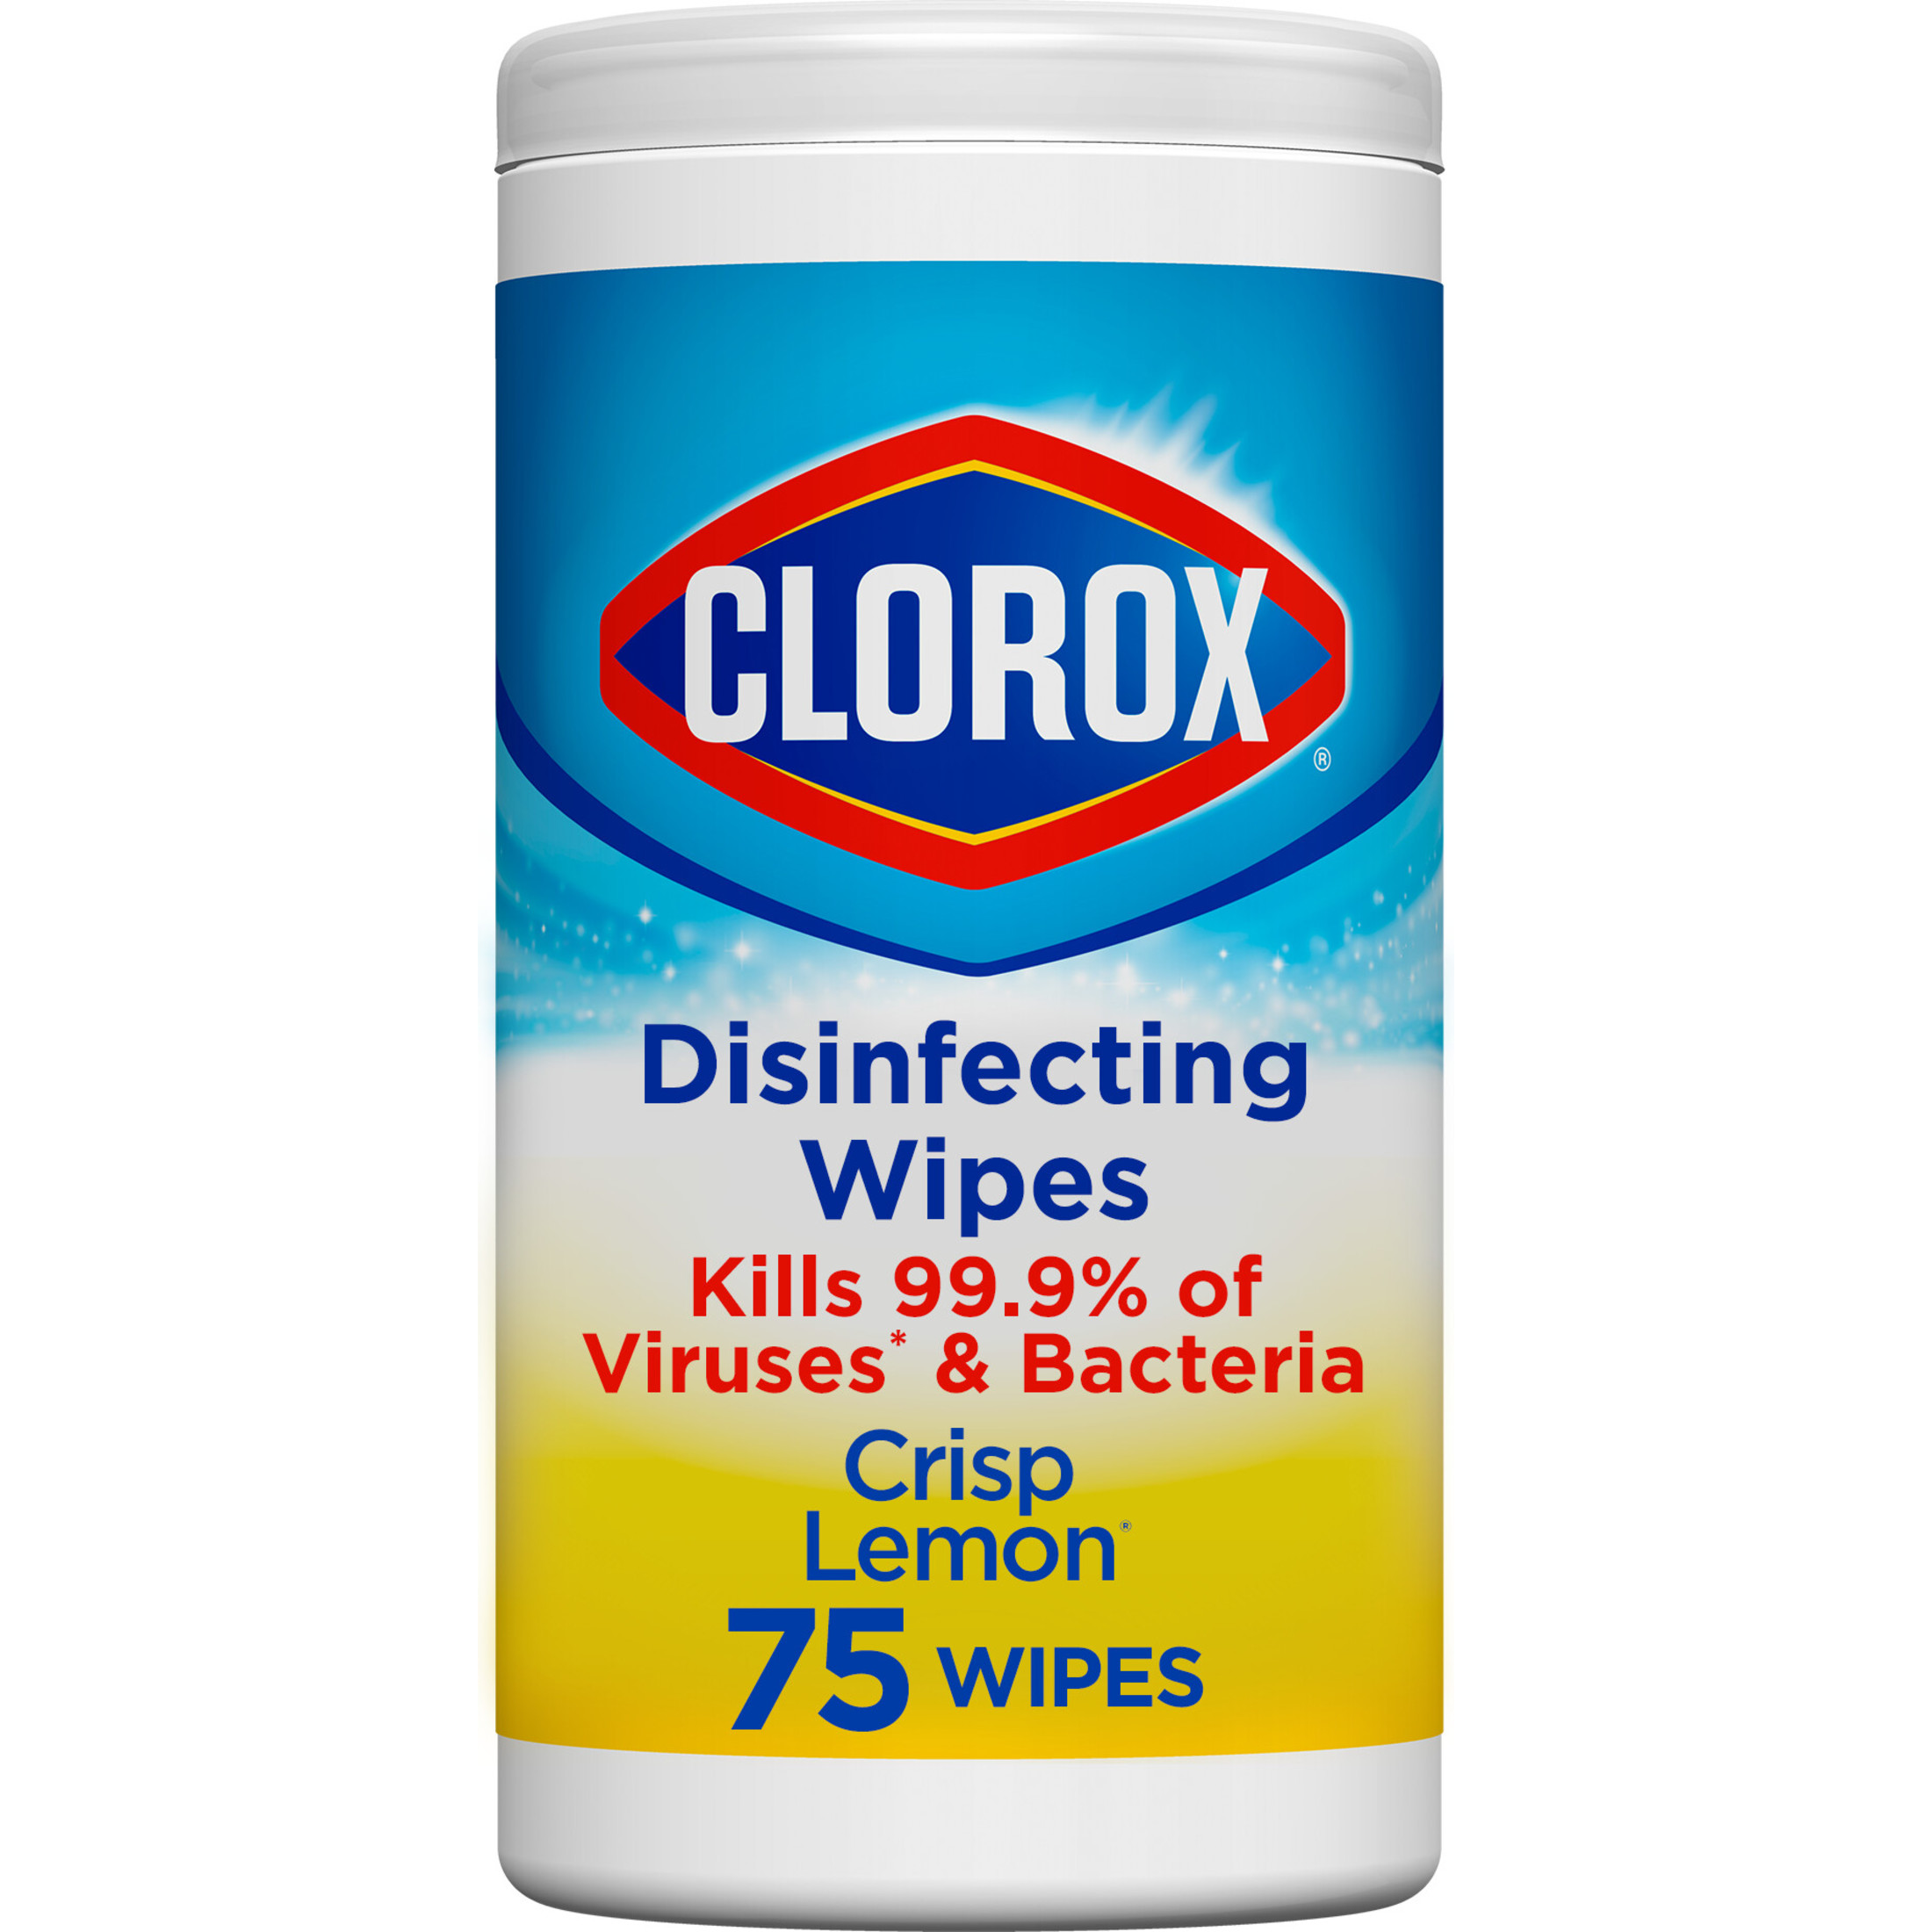 Clorox Bleach-Free Disinfecting and Cleaning Wipes, Crisp Lemon, 75 Count - image 1 of 10